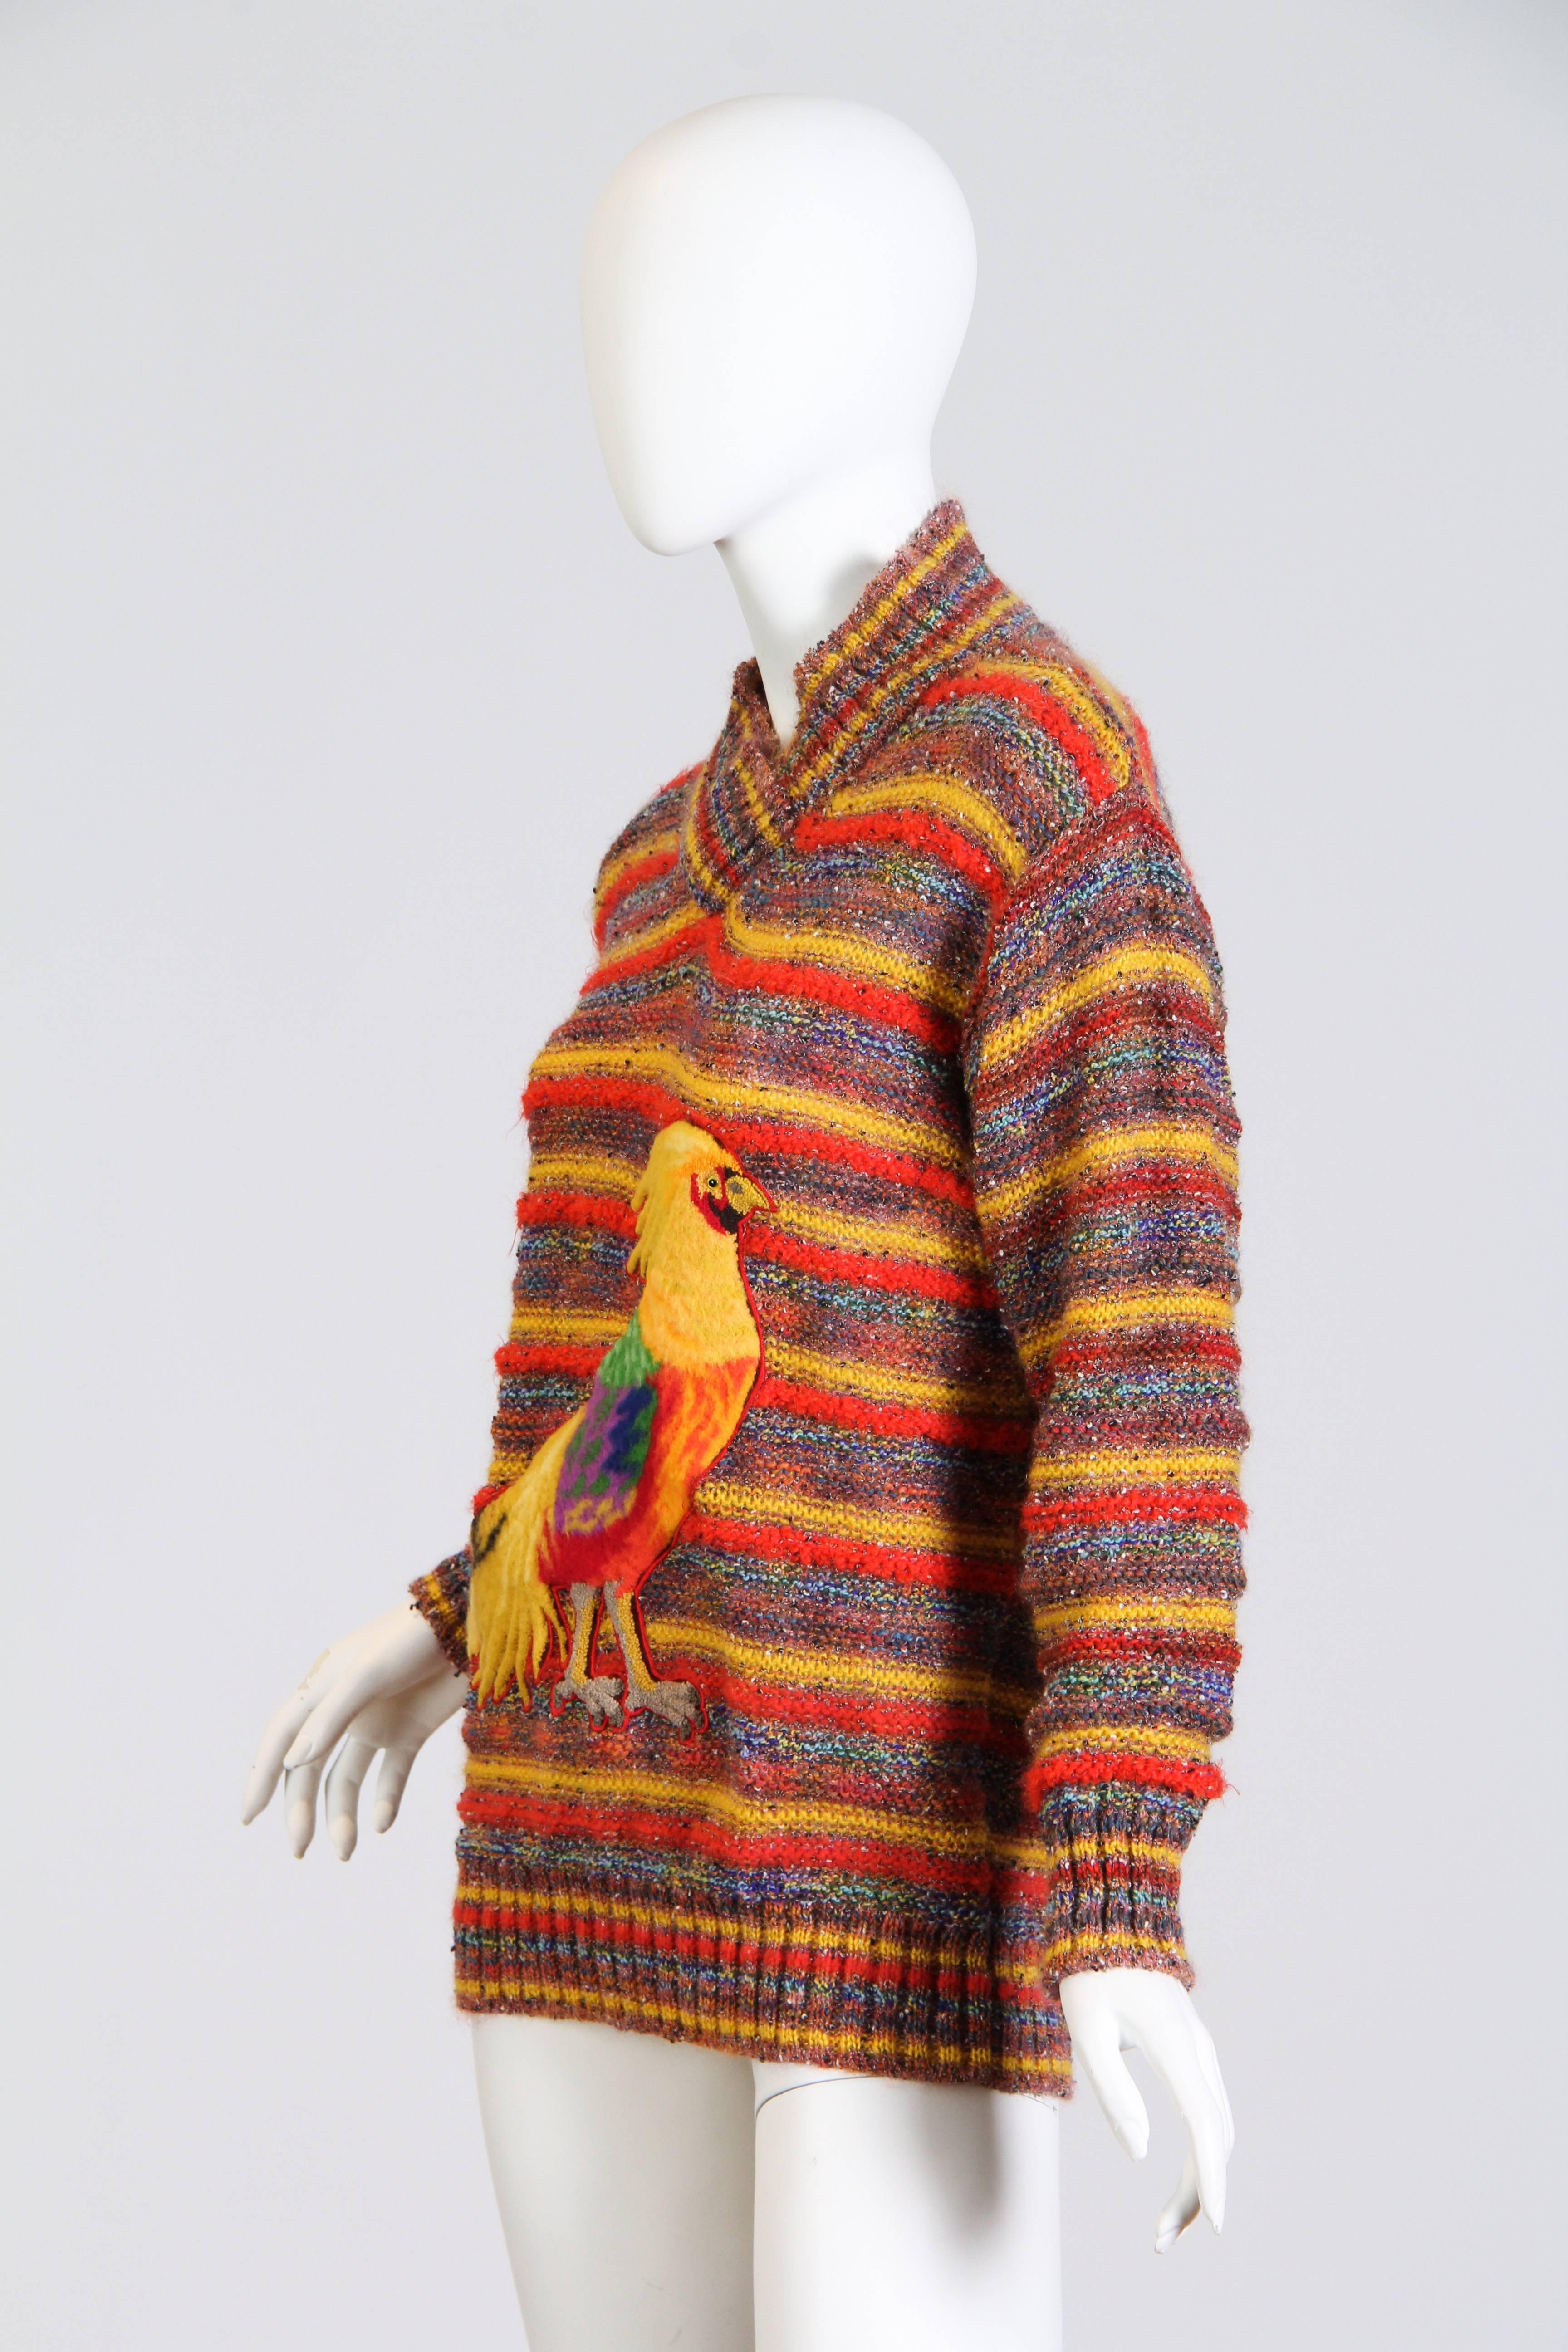 This sweater is part of a line of autumnal animal sweaters by knitwear design house Missoni. Known for their technical expertise and playful fashions, Missoni manufactures these striking pieces in Italy to ensure their quality. This sweater has a